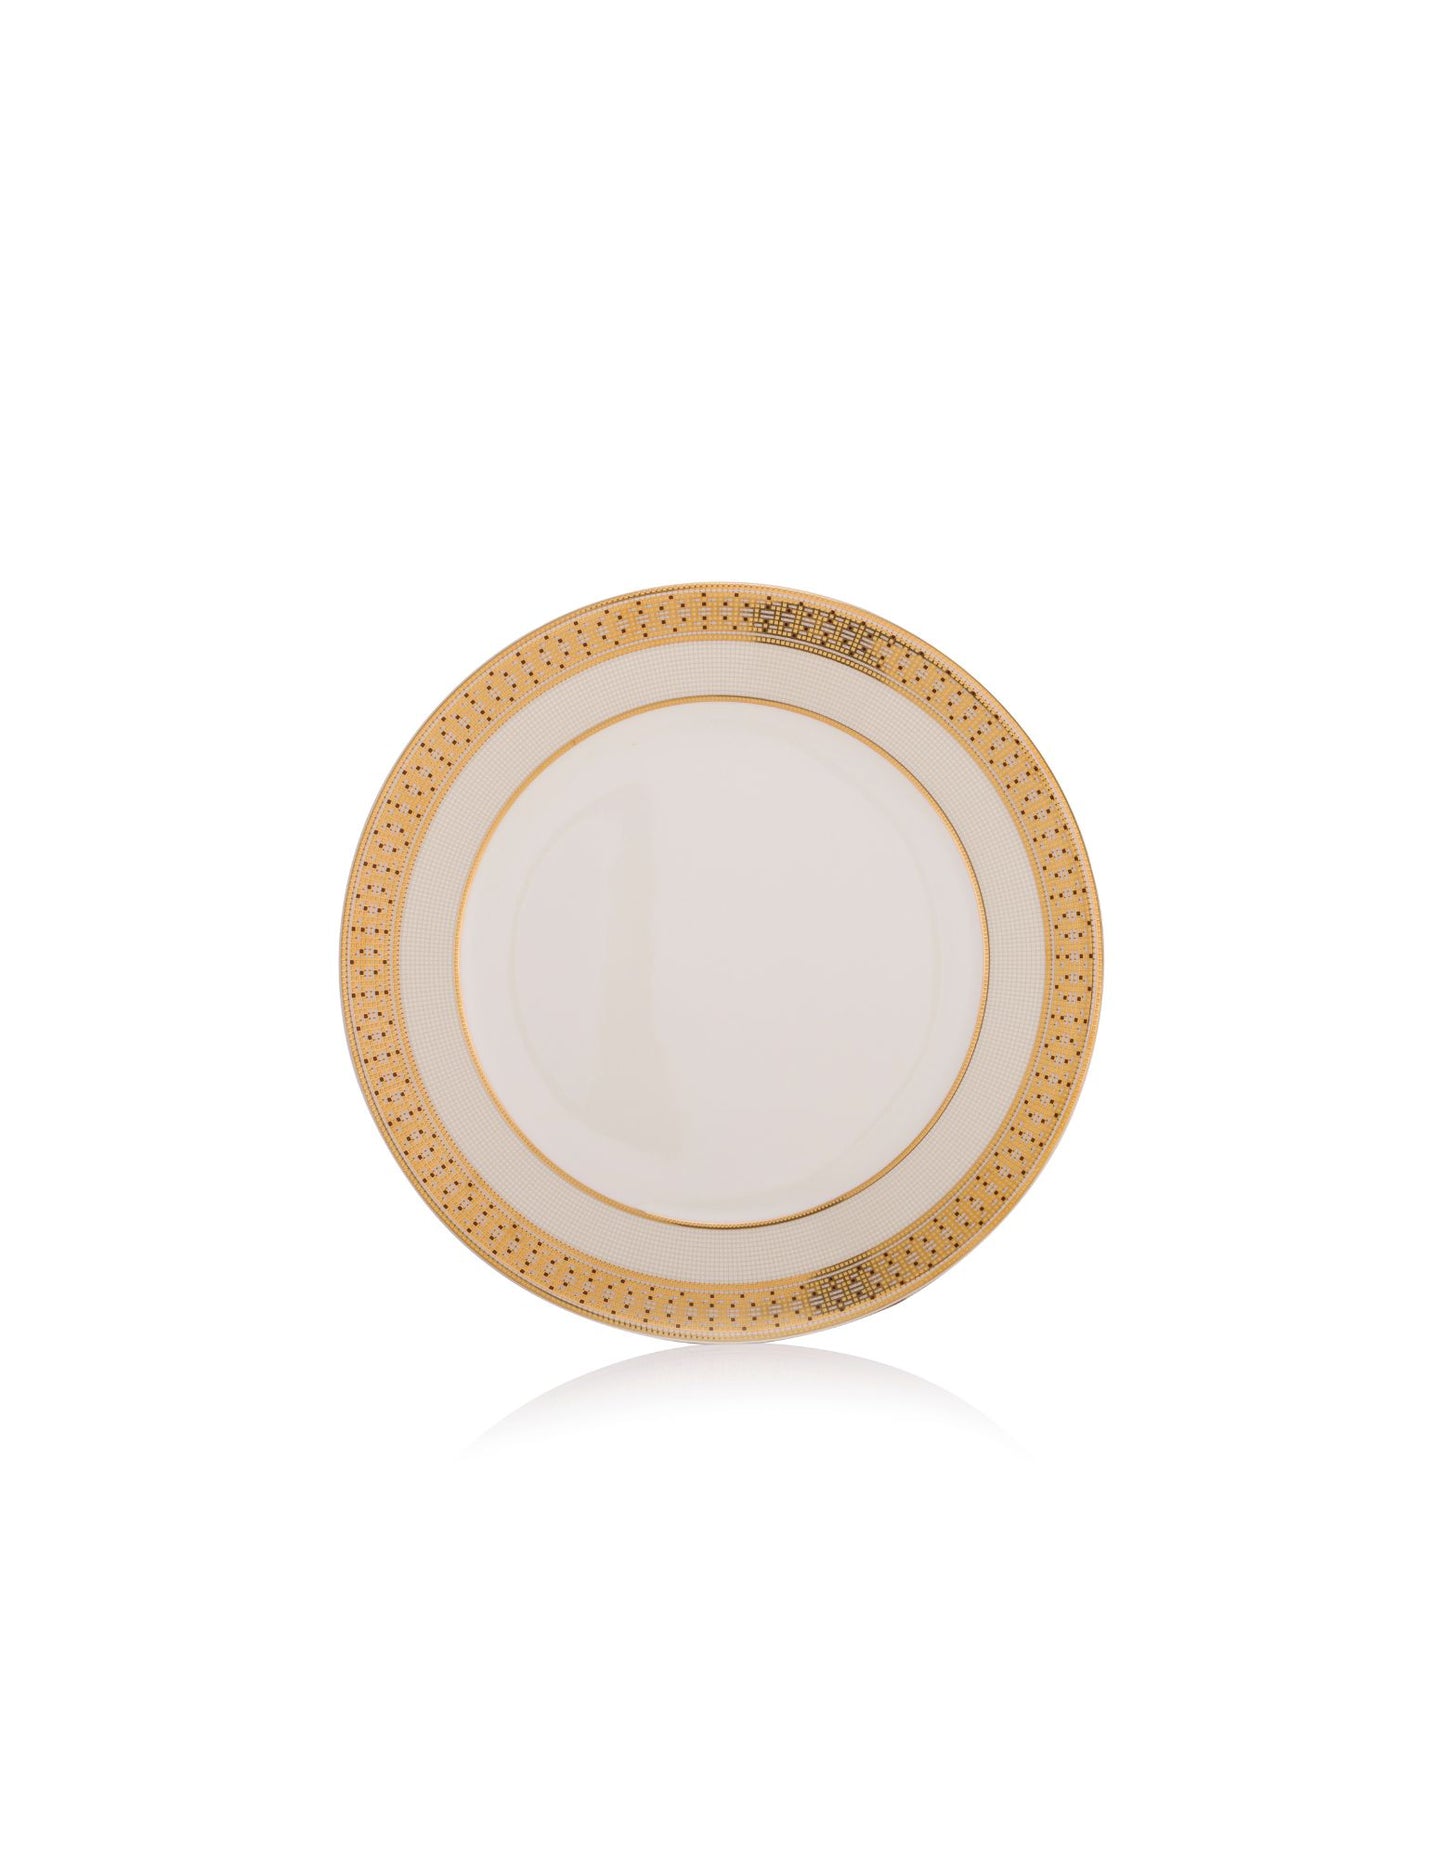 Dru collection - side plate